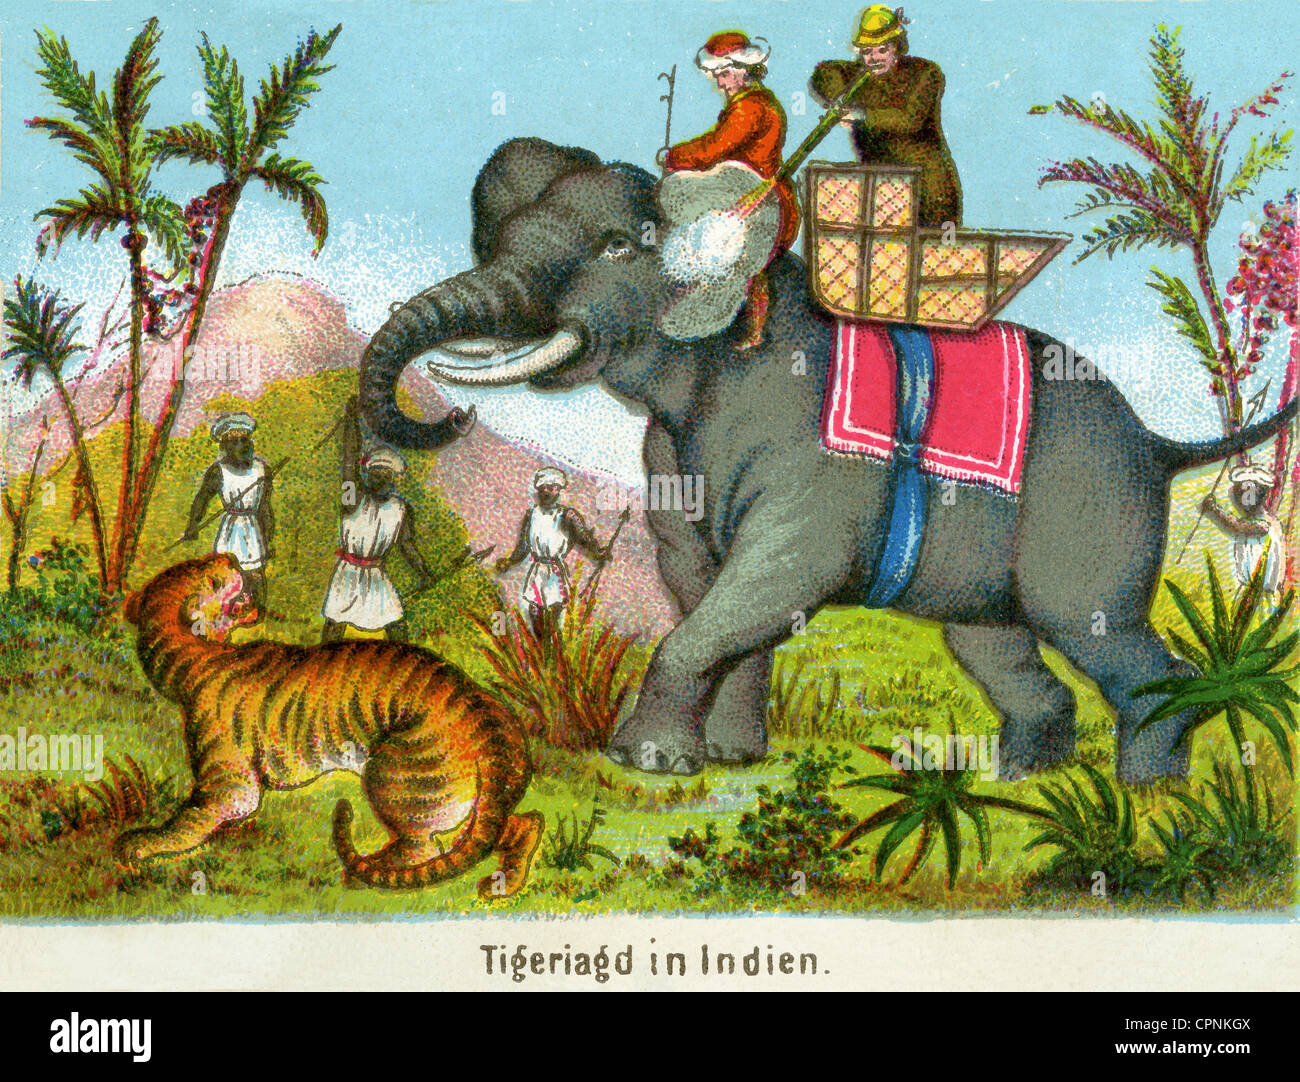 hunt, big-game hunting, tiger hunt, British big-game hunter, hunter is riding on elephant, India, lithograph, circa 1860, Additional-Rights-Clearences-Not Available Stock Photo